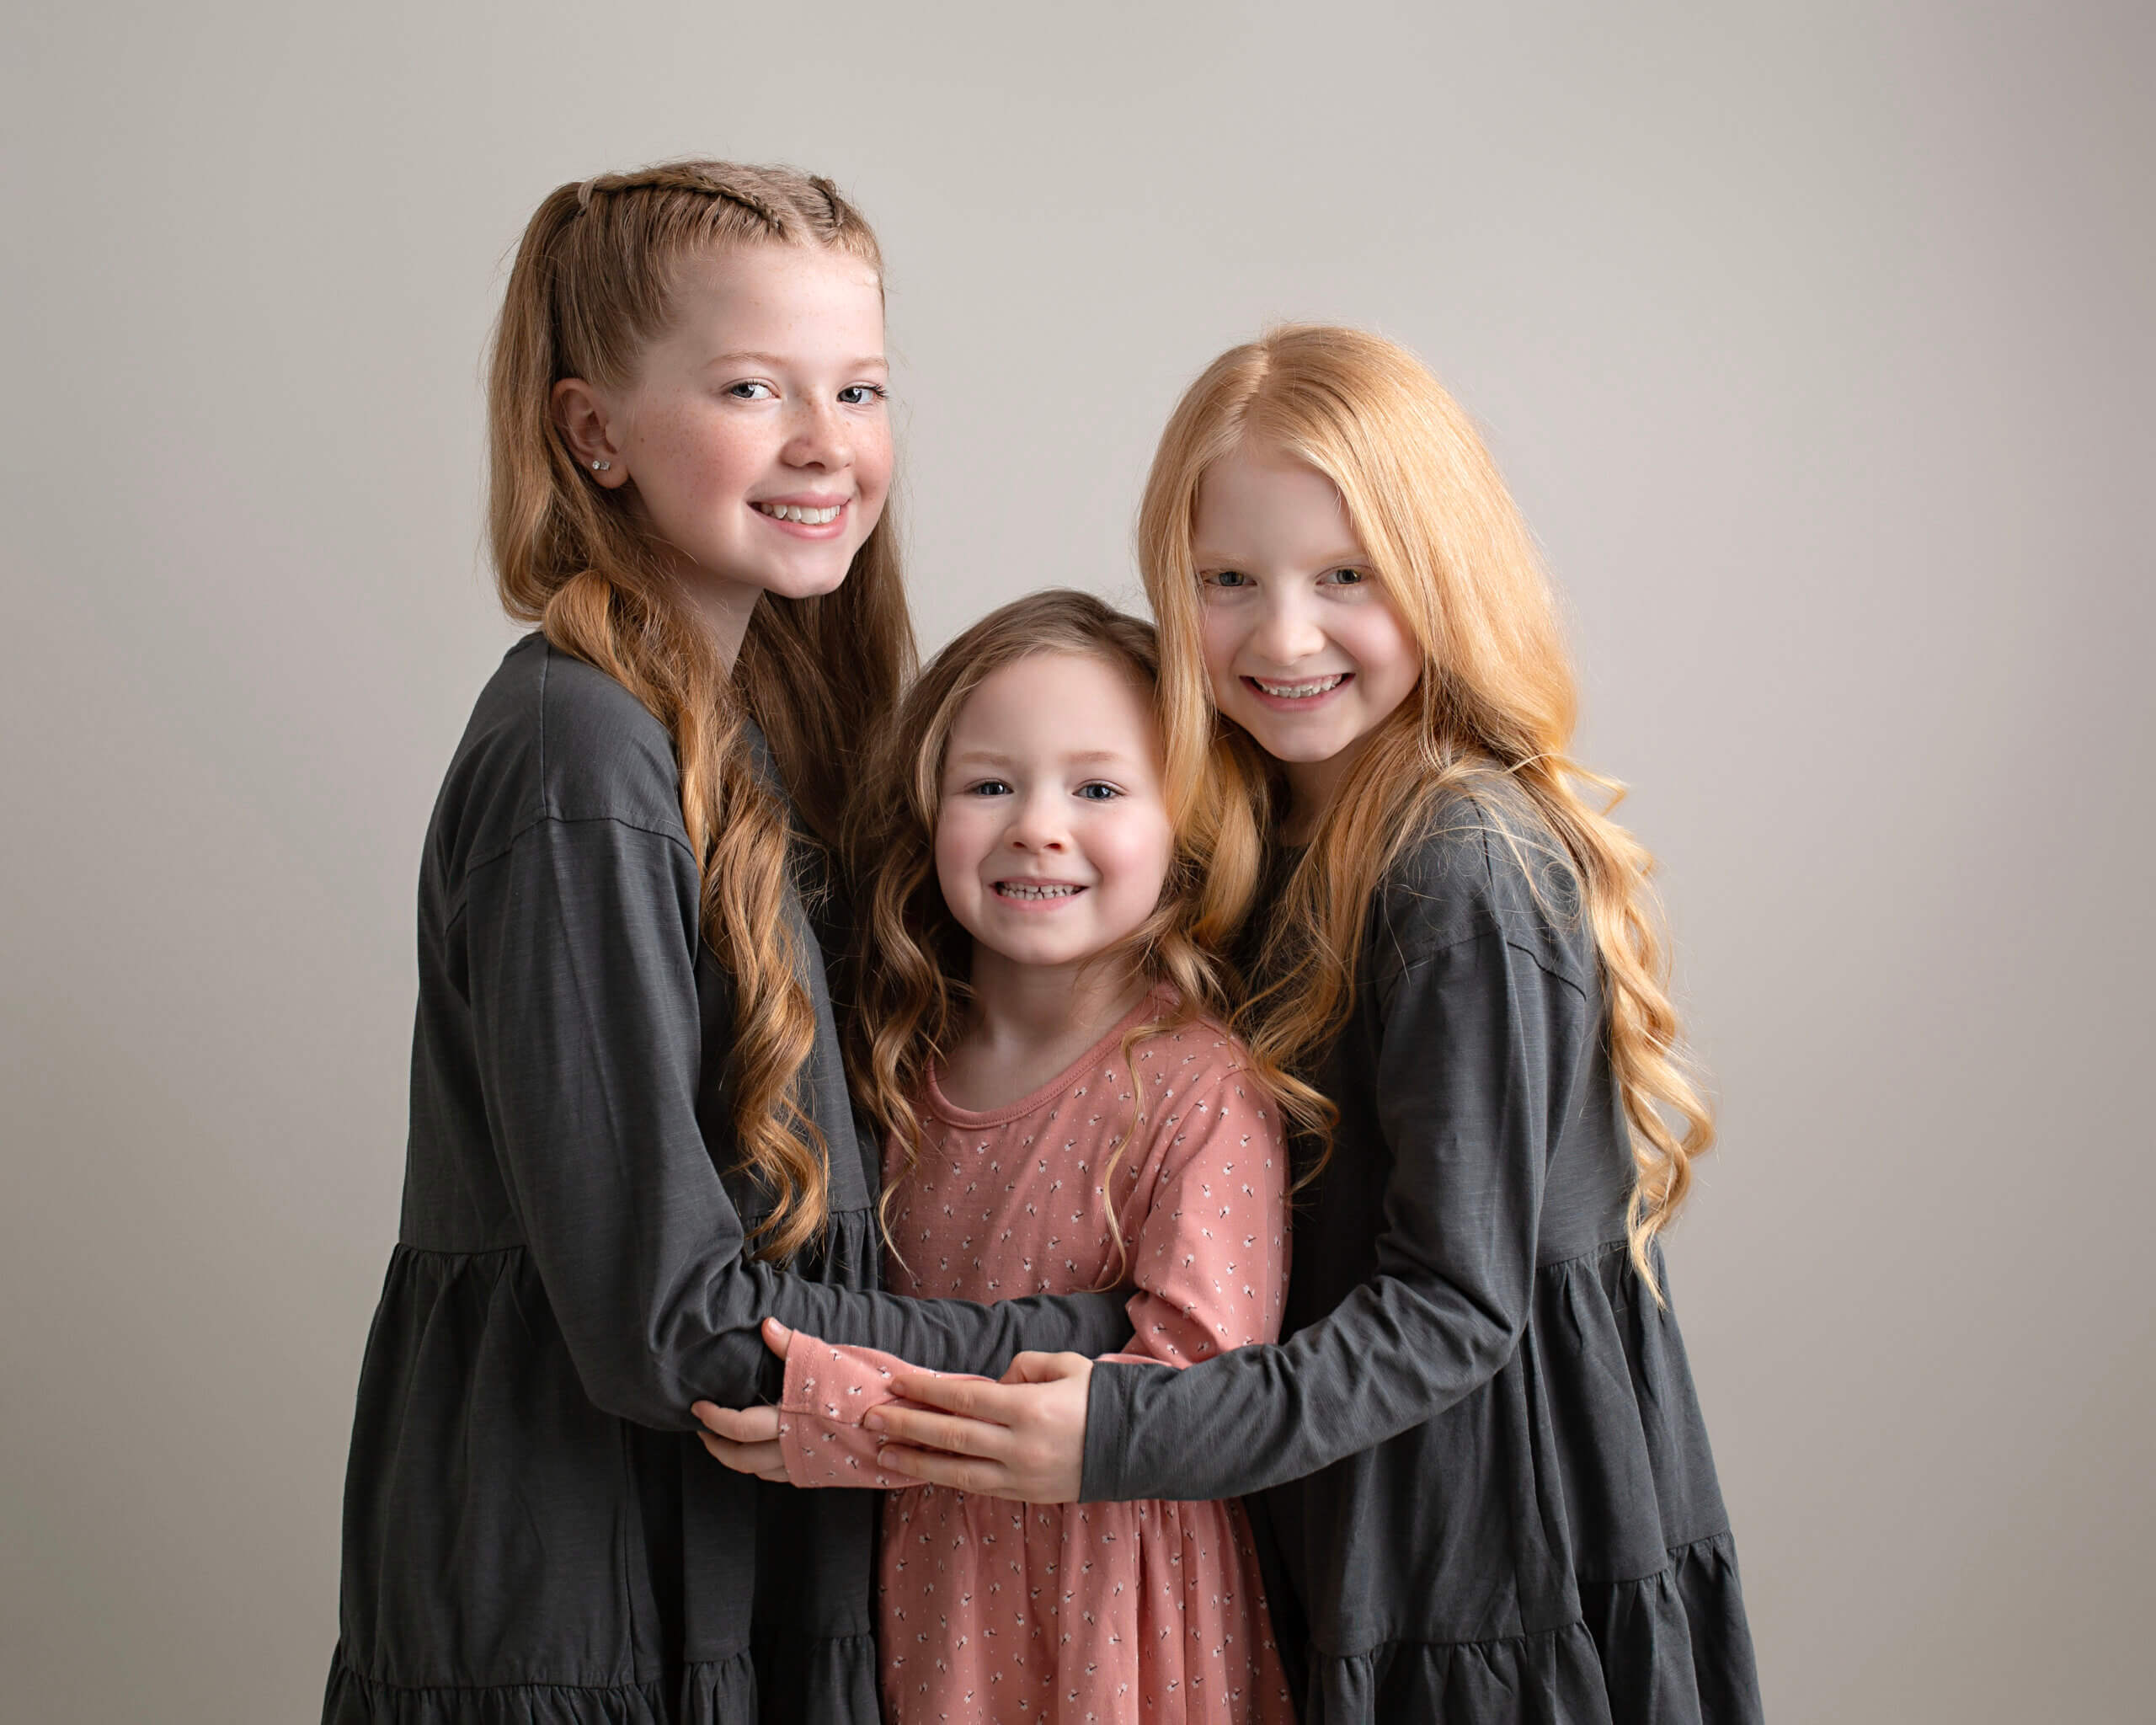 Beautiful sisters at their Family Photoshoot in Birmingham